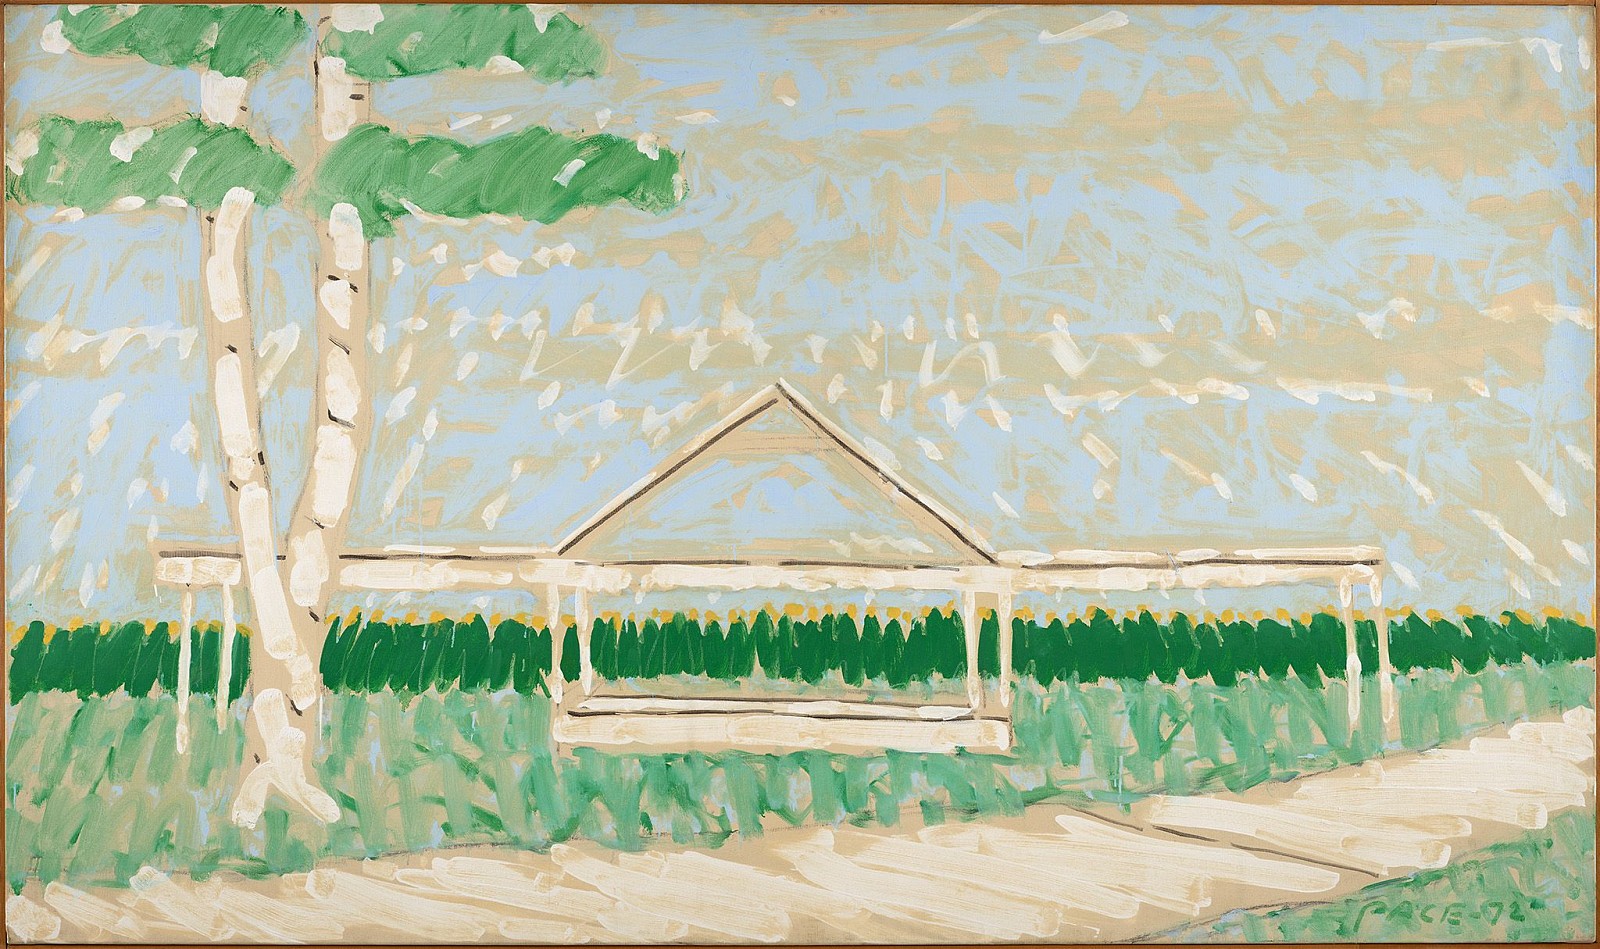 Stephen Pace, Iowa Park (72-8), 1972
Oil on canvas, 50 x 85 in. (127 x 215.9 cm)
PAC-00227